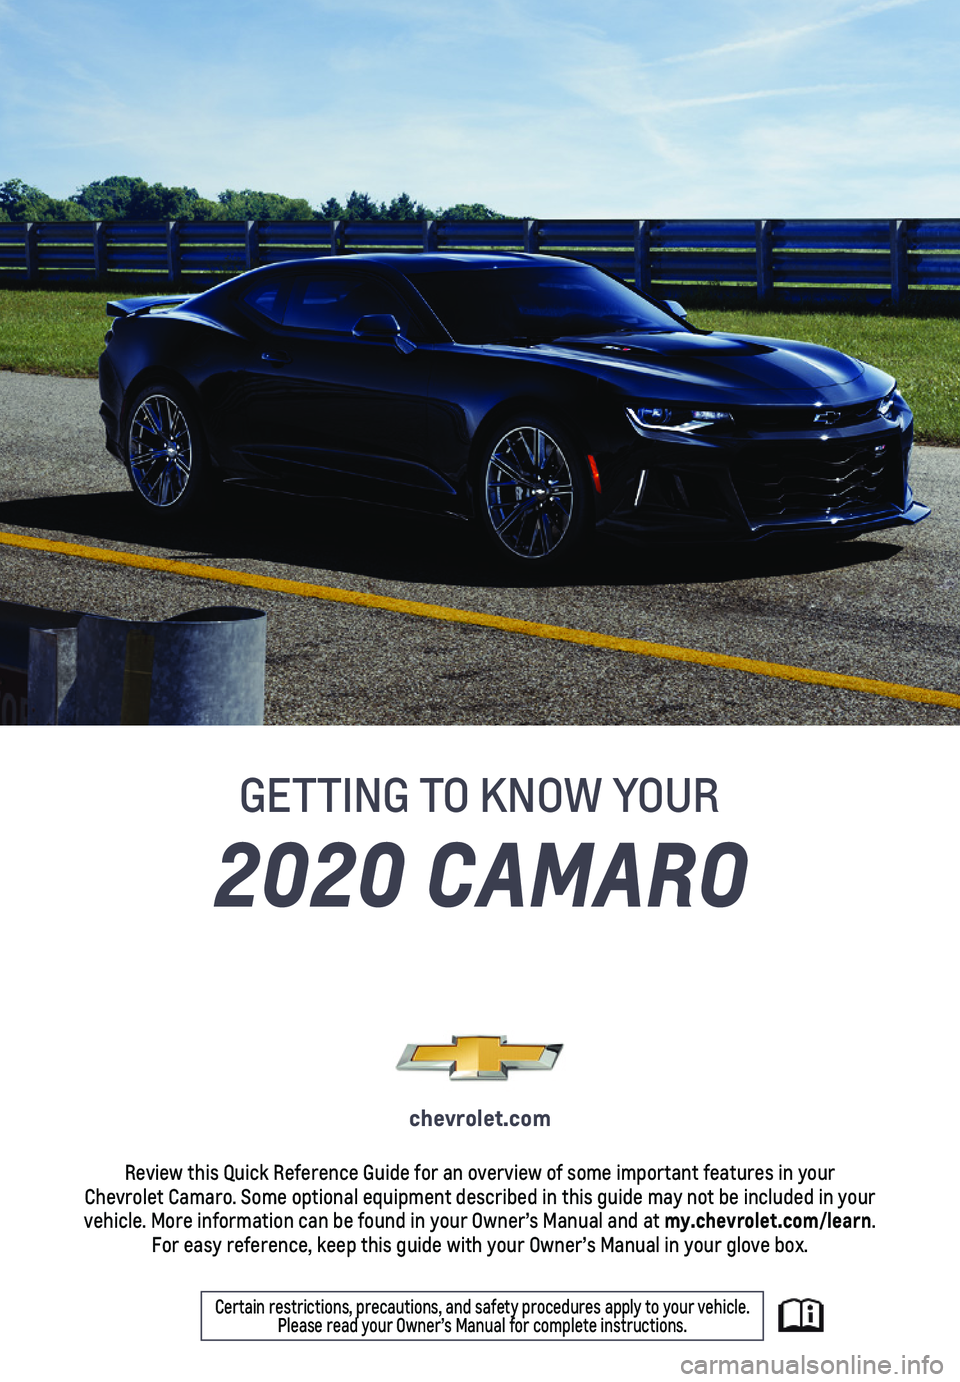 CHEVROLET CAMARO 2020  Owners Manual 2020 CAMARO
GETTING TO KNOW YOUR
chevrolet.com
Review this Quick Reference Guide for an overview of some important feat\
ures in your  Chevrolet Camaro. Some optional equipment described in this guide